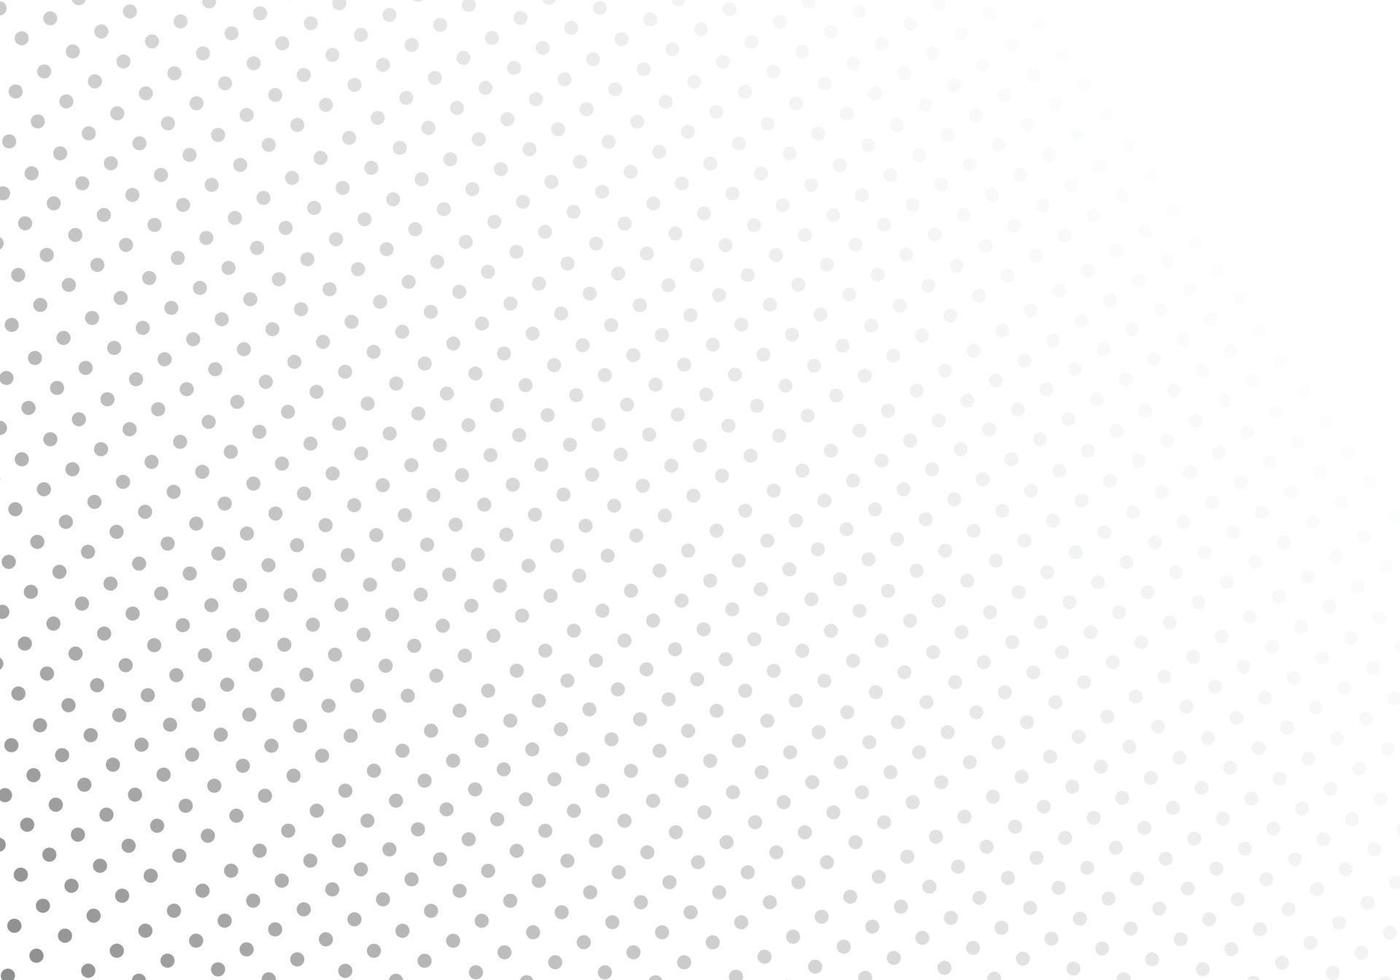 A Black and white gradient polka dot background pattern arranged at a diagonal angle on a white background vector